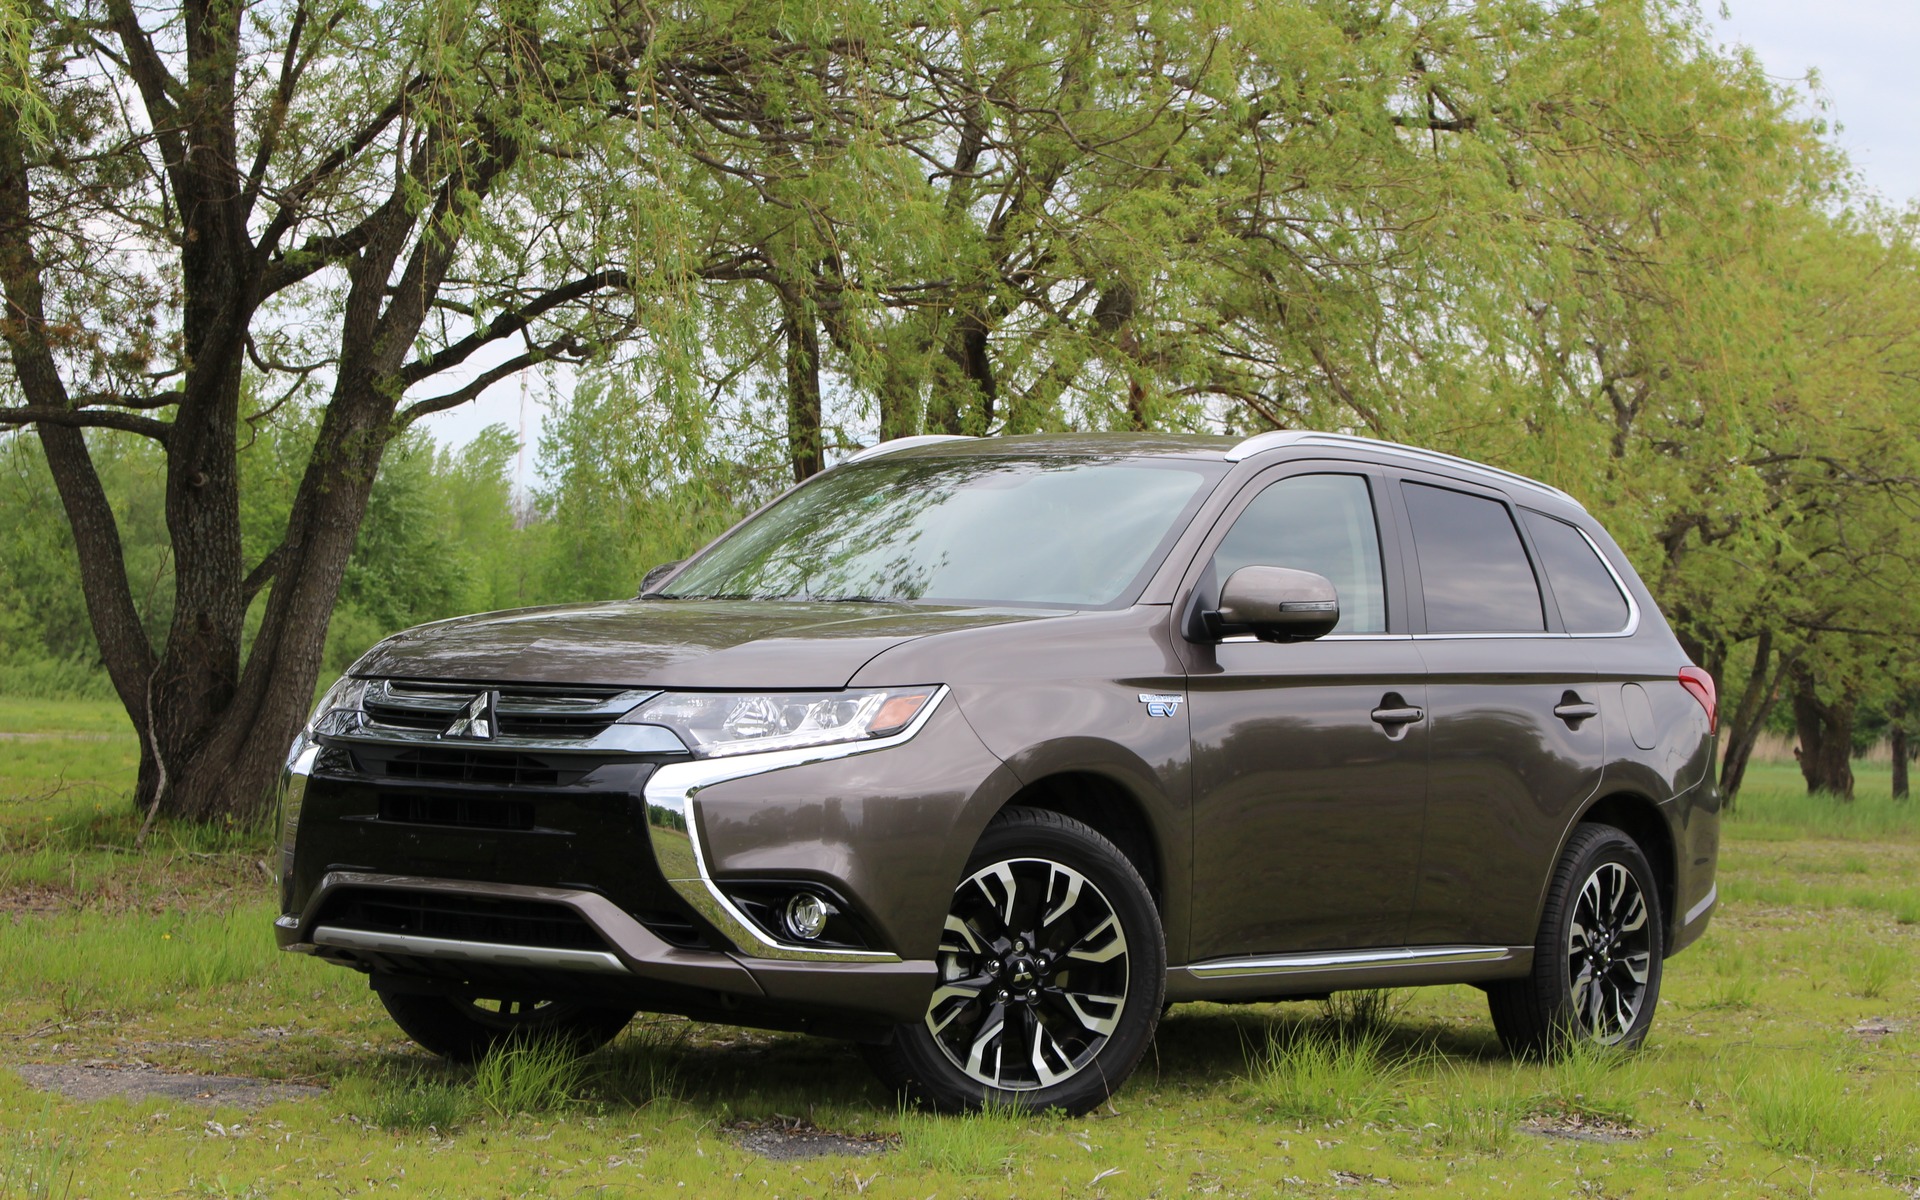 2018 Mitsubishi Outlander PHEV: The Next Logical Step - The Car Guide